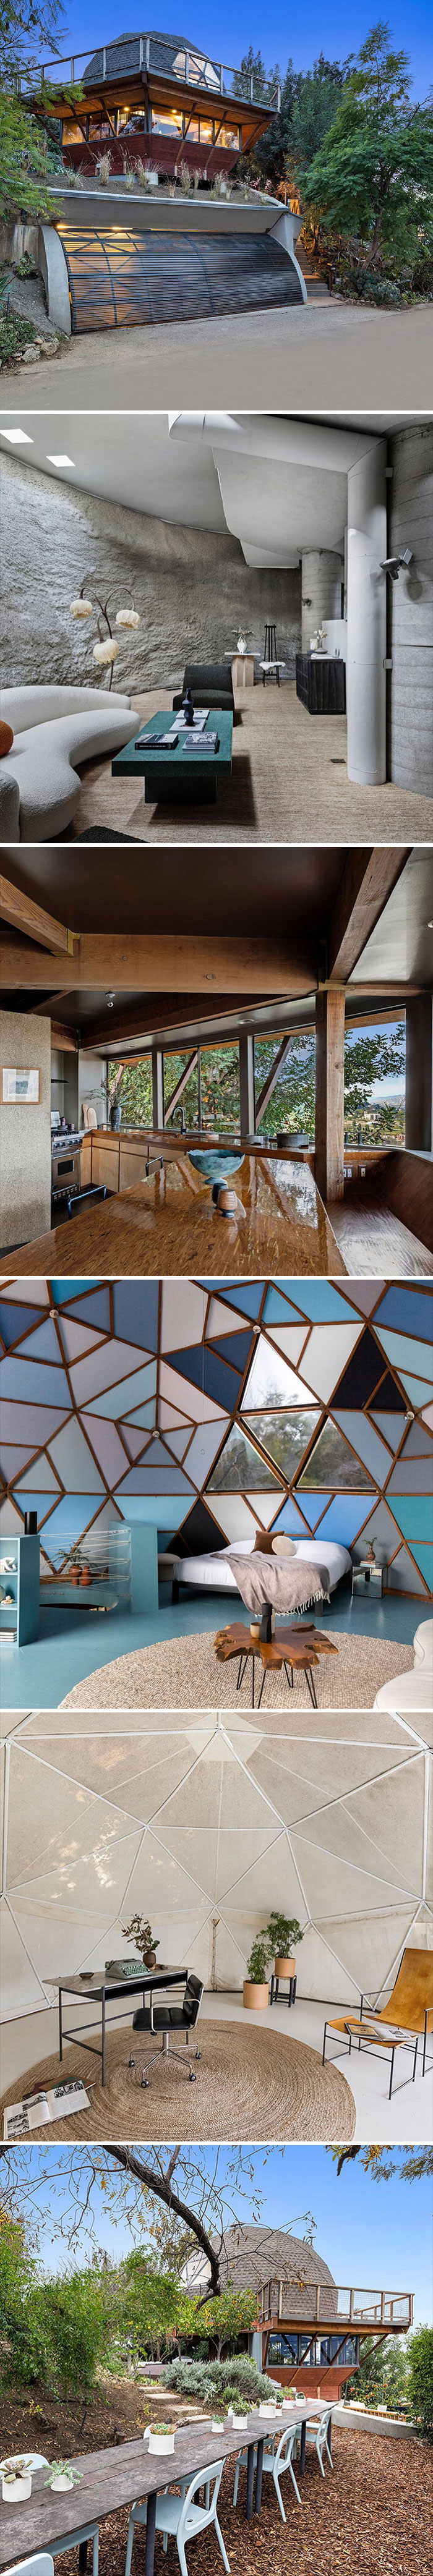  A Perfect Geodesic Dome Home In Los Angeles. Currently Listed For $1,725,000